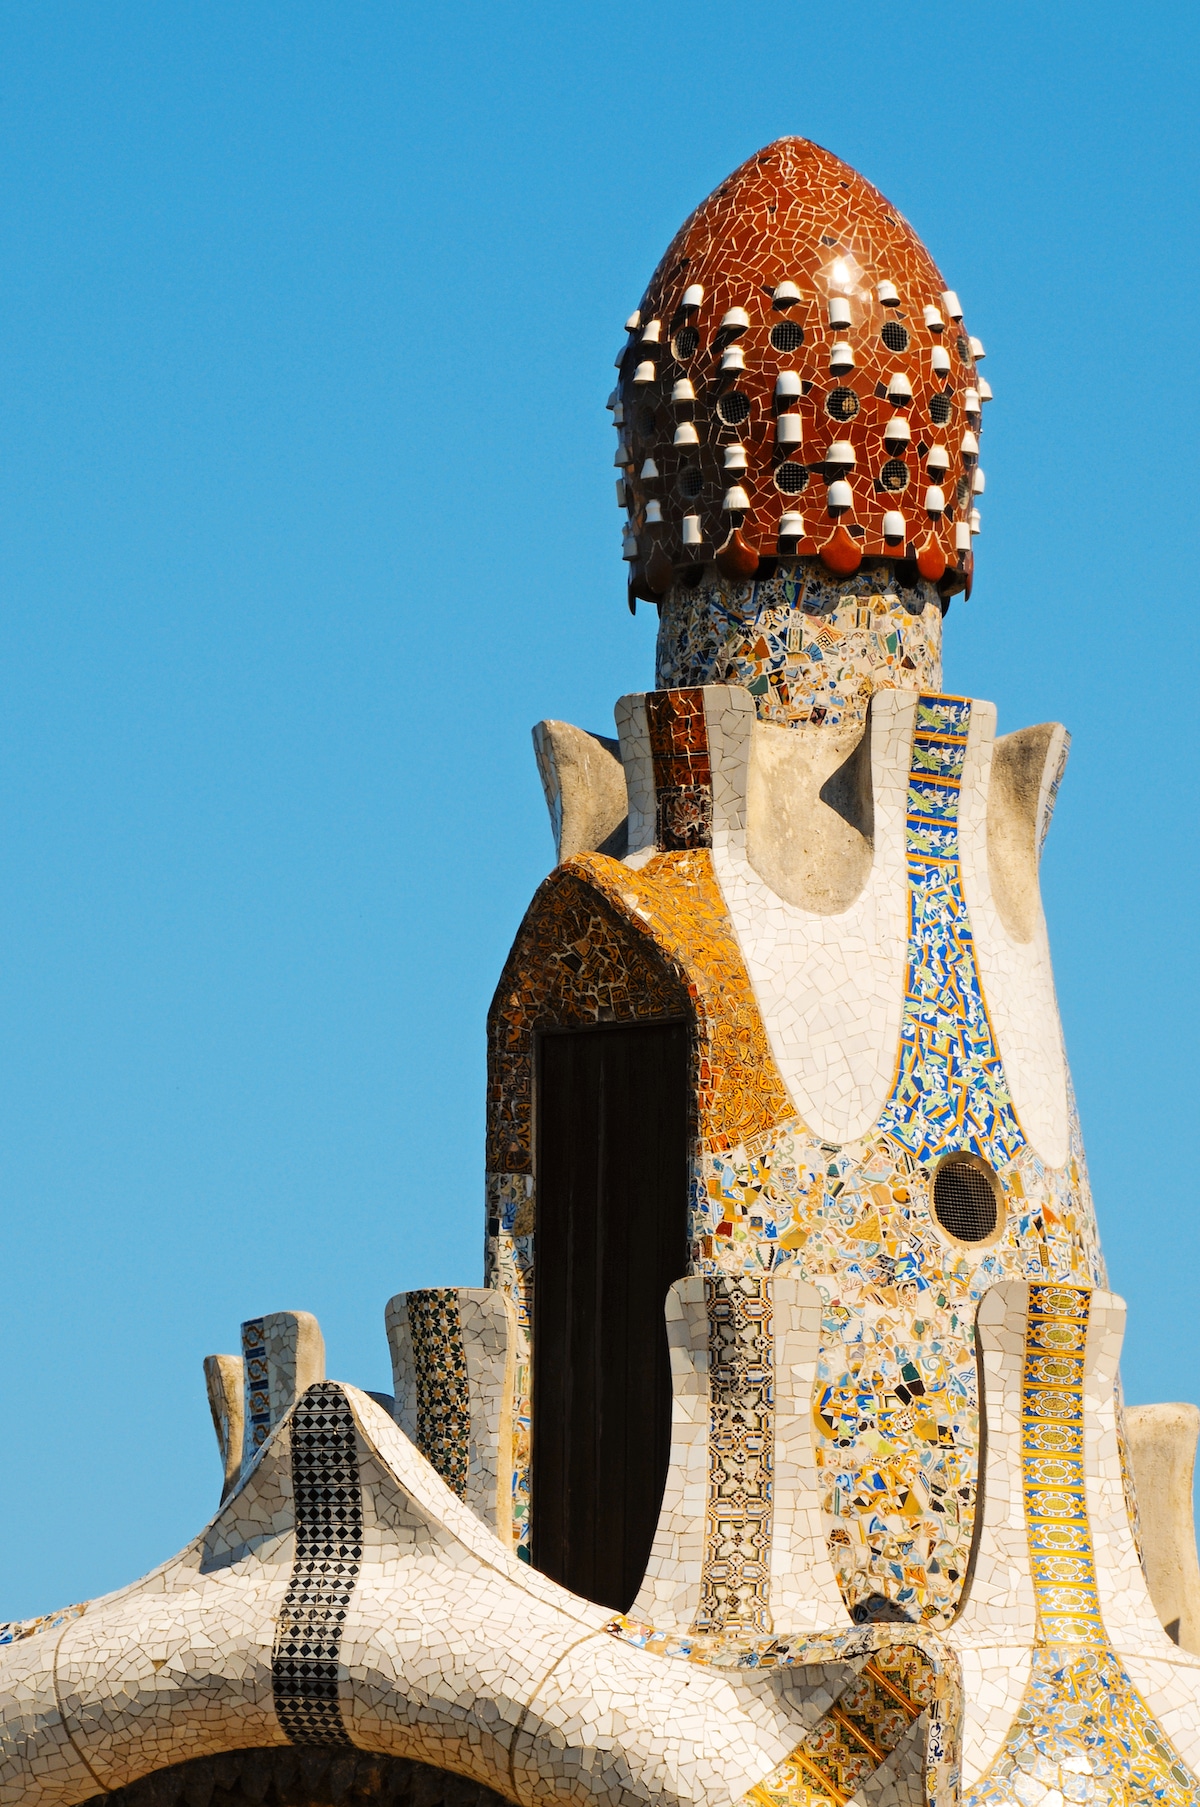 Roof Details on Gaudi's Work